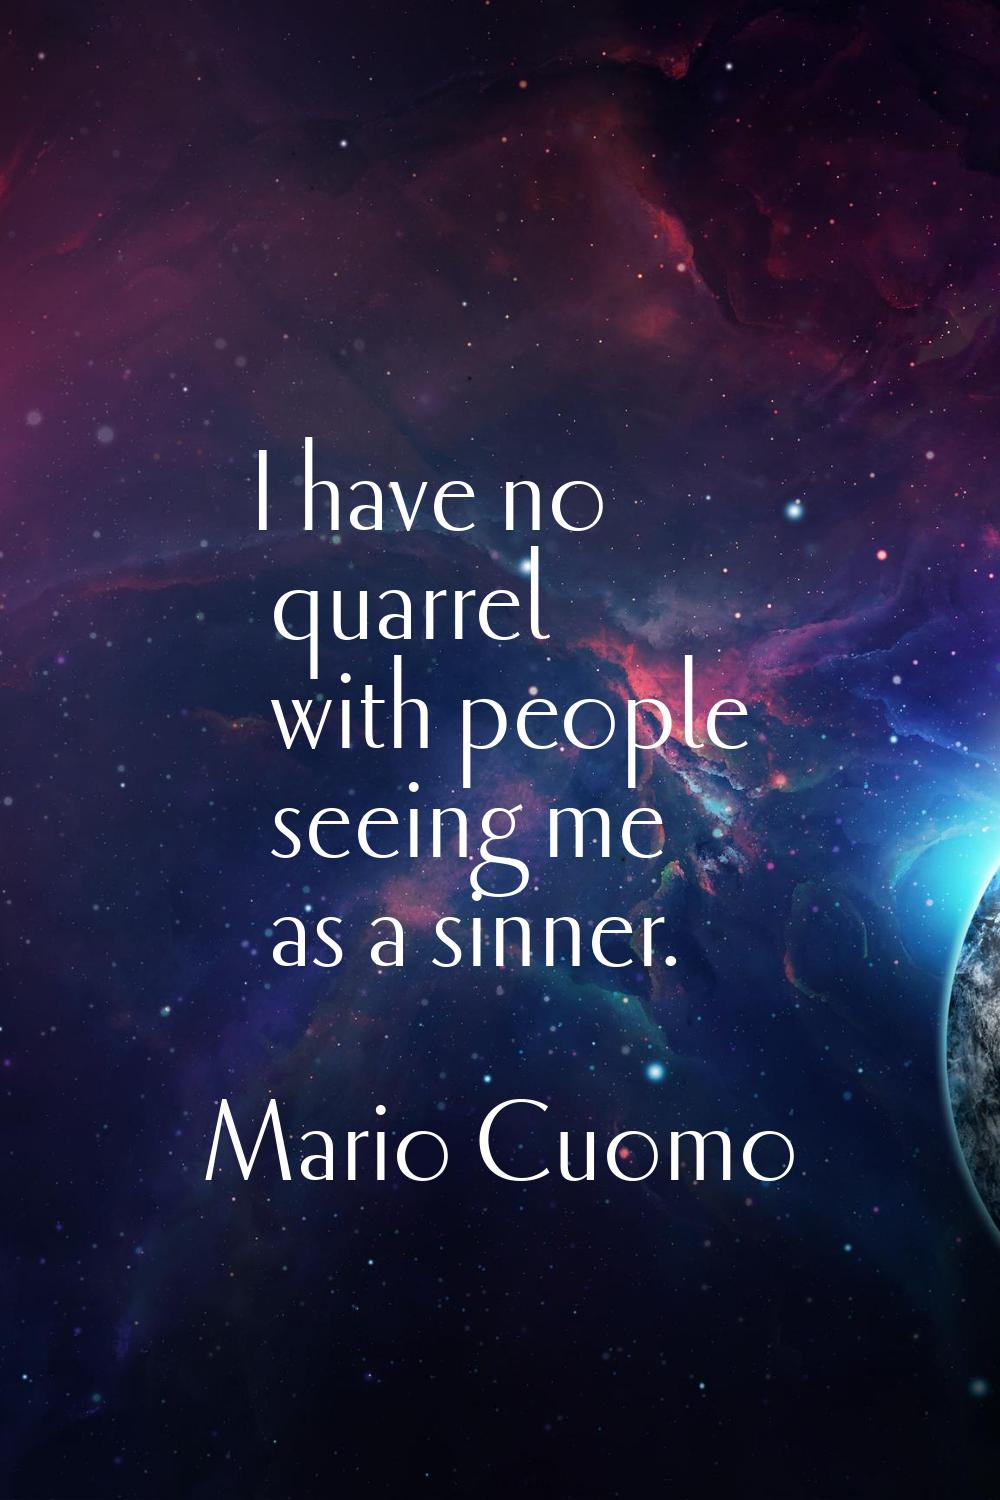 I have no quarrel with people seeing me as a sinner.